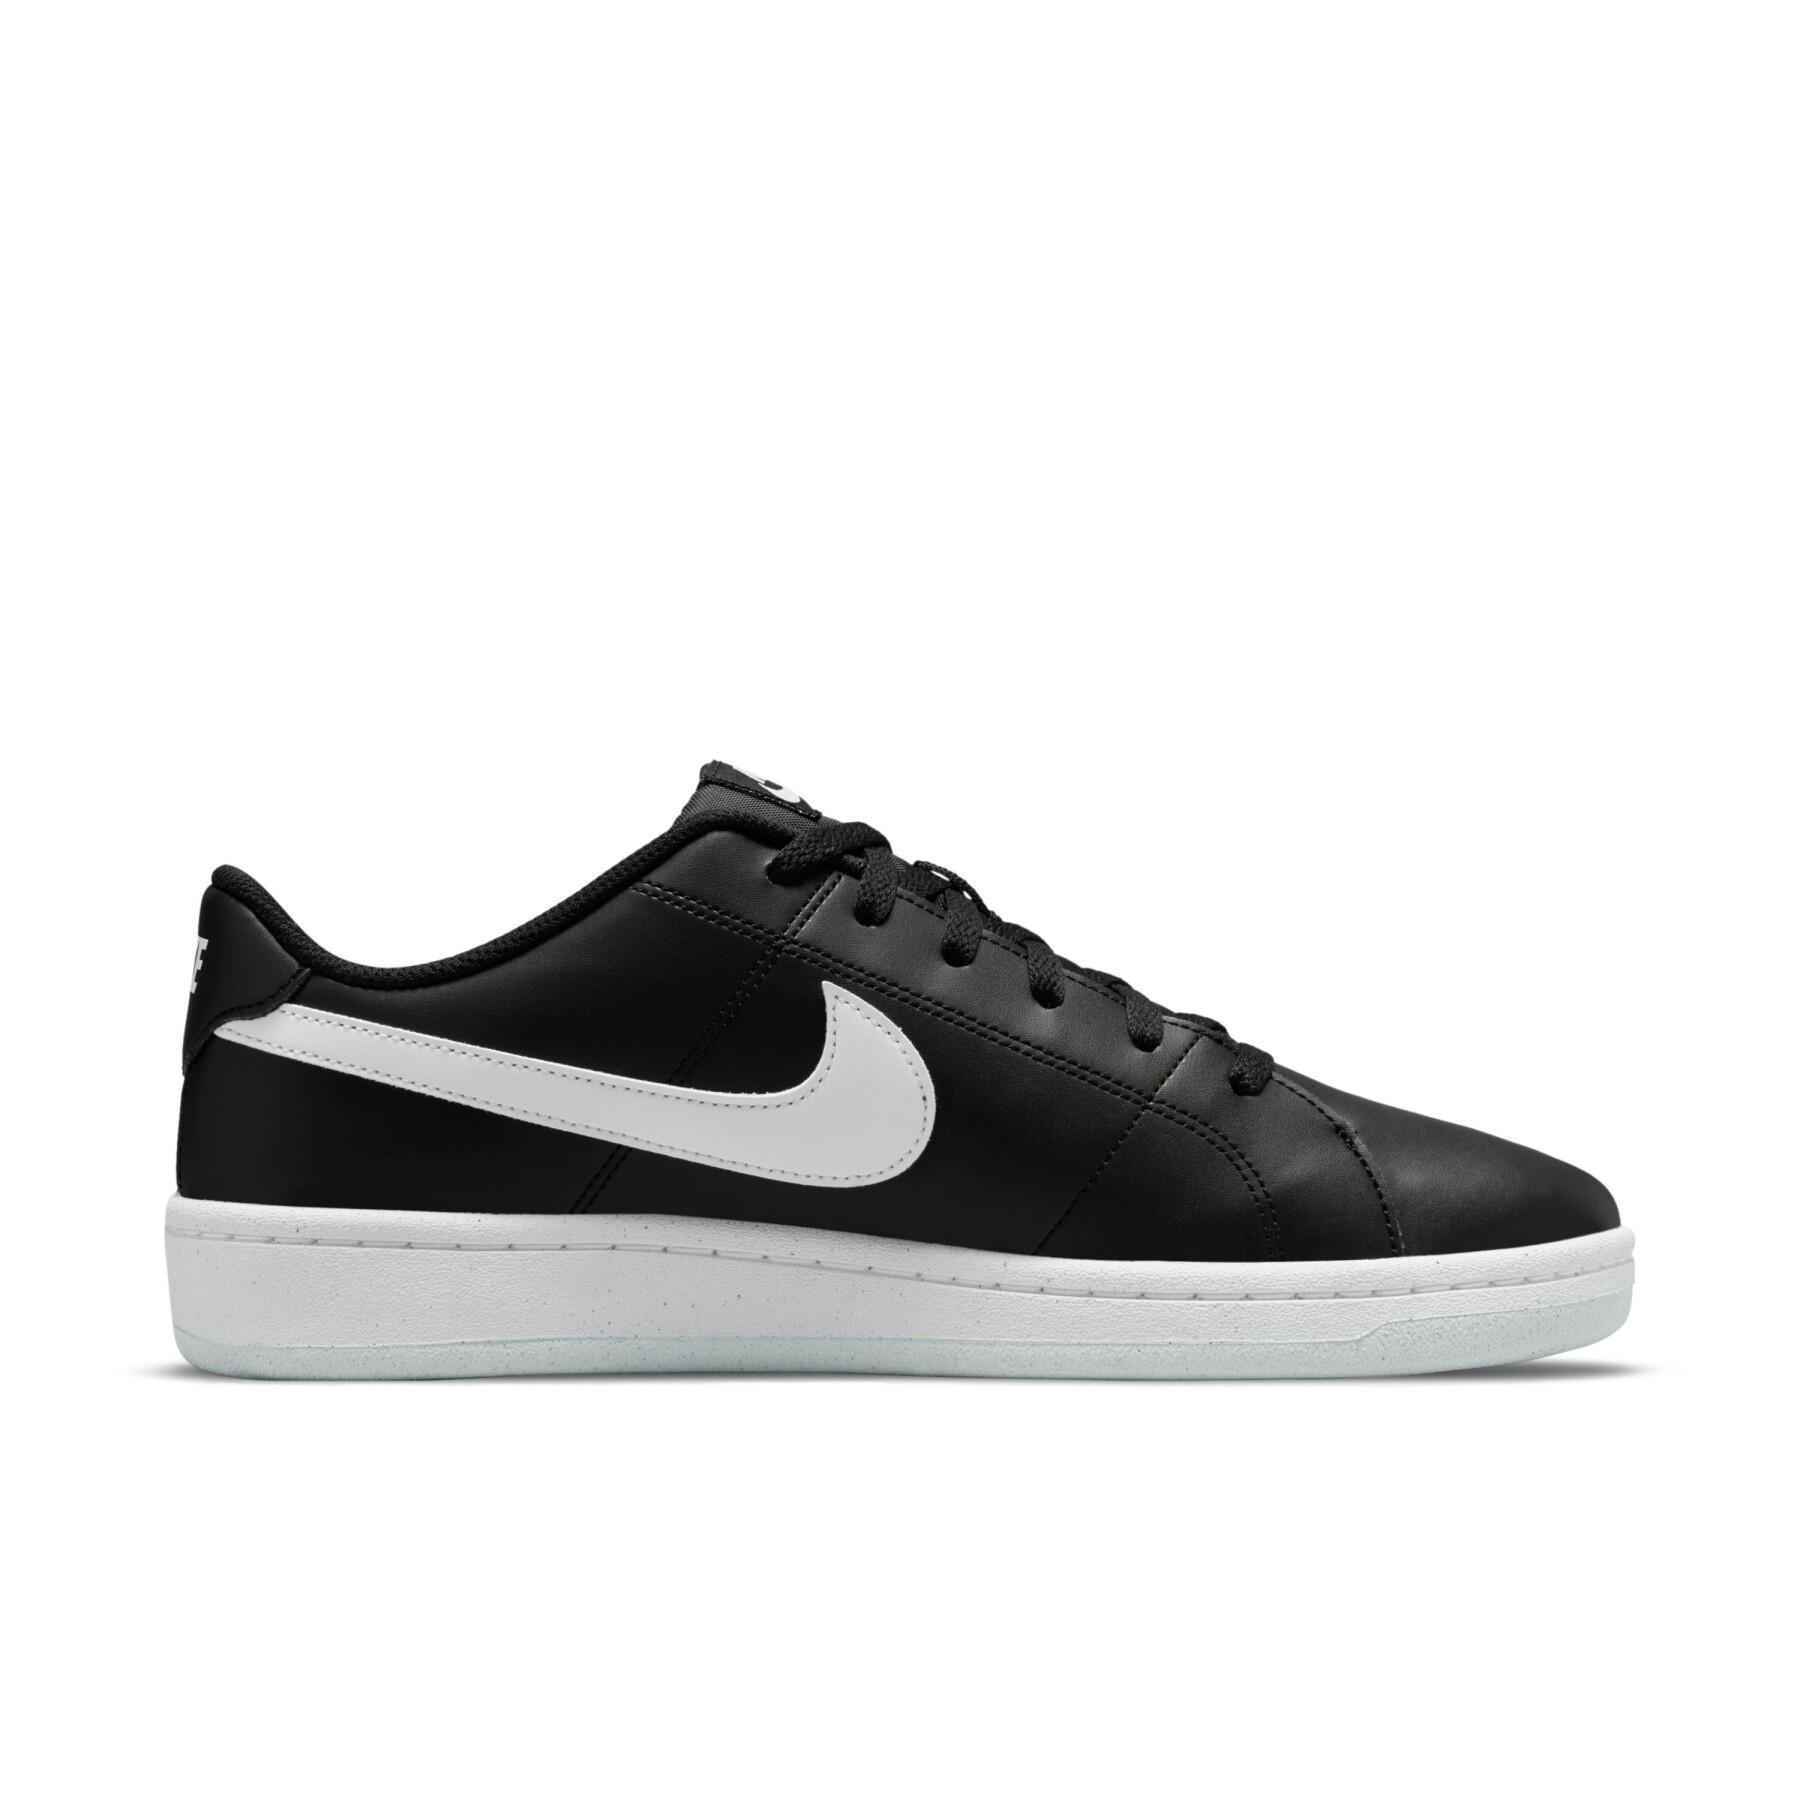 Formadores Nike Court Royale 2 Next Nature